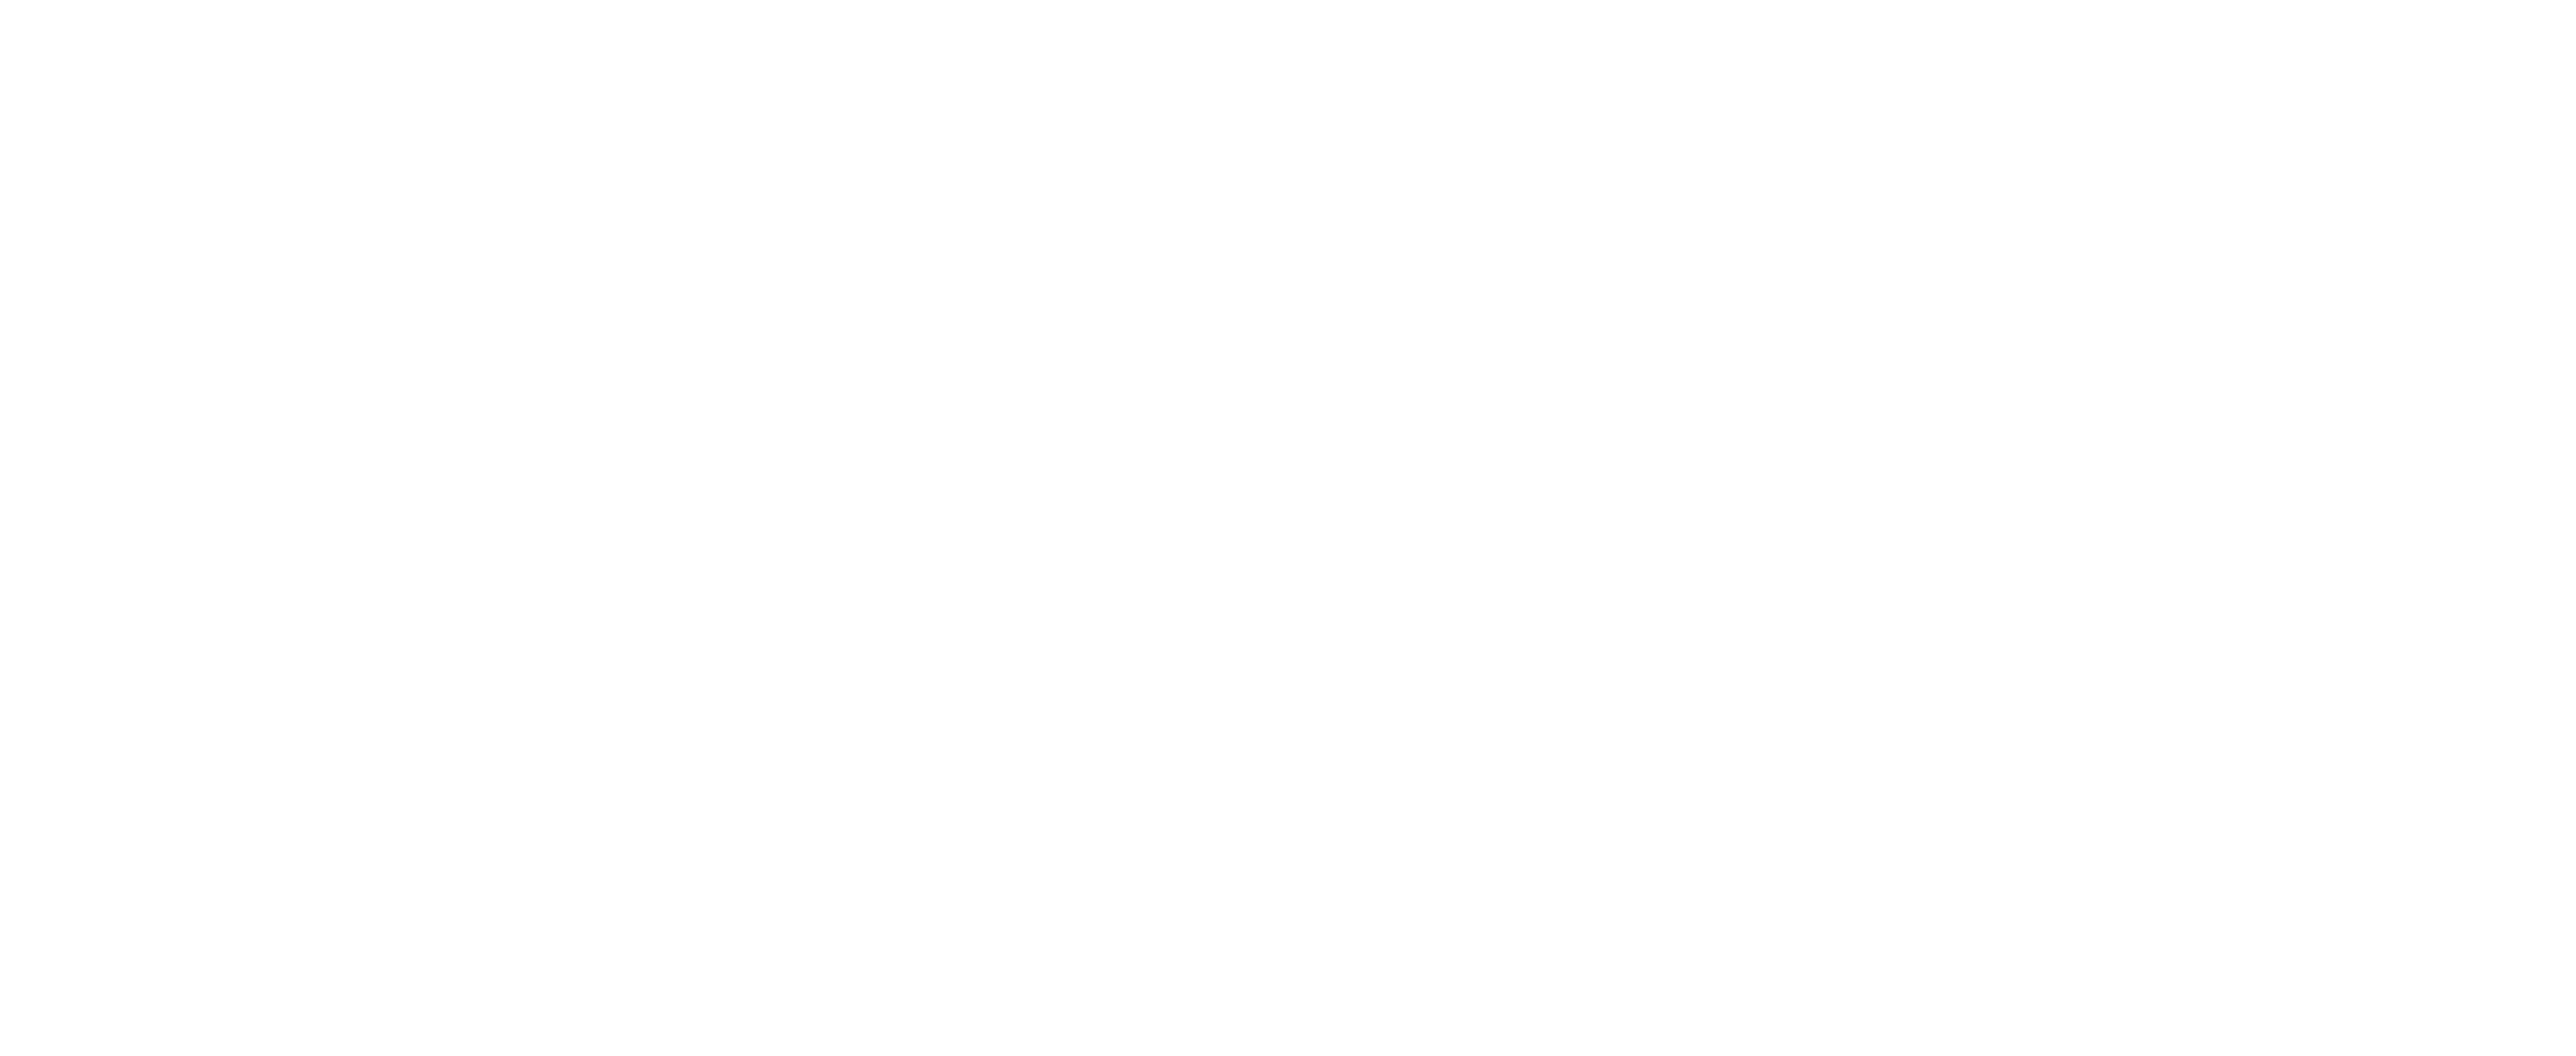 Airbus Logo - Airbus Helicopters Logos